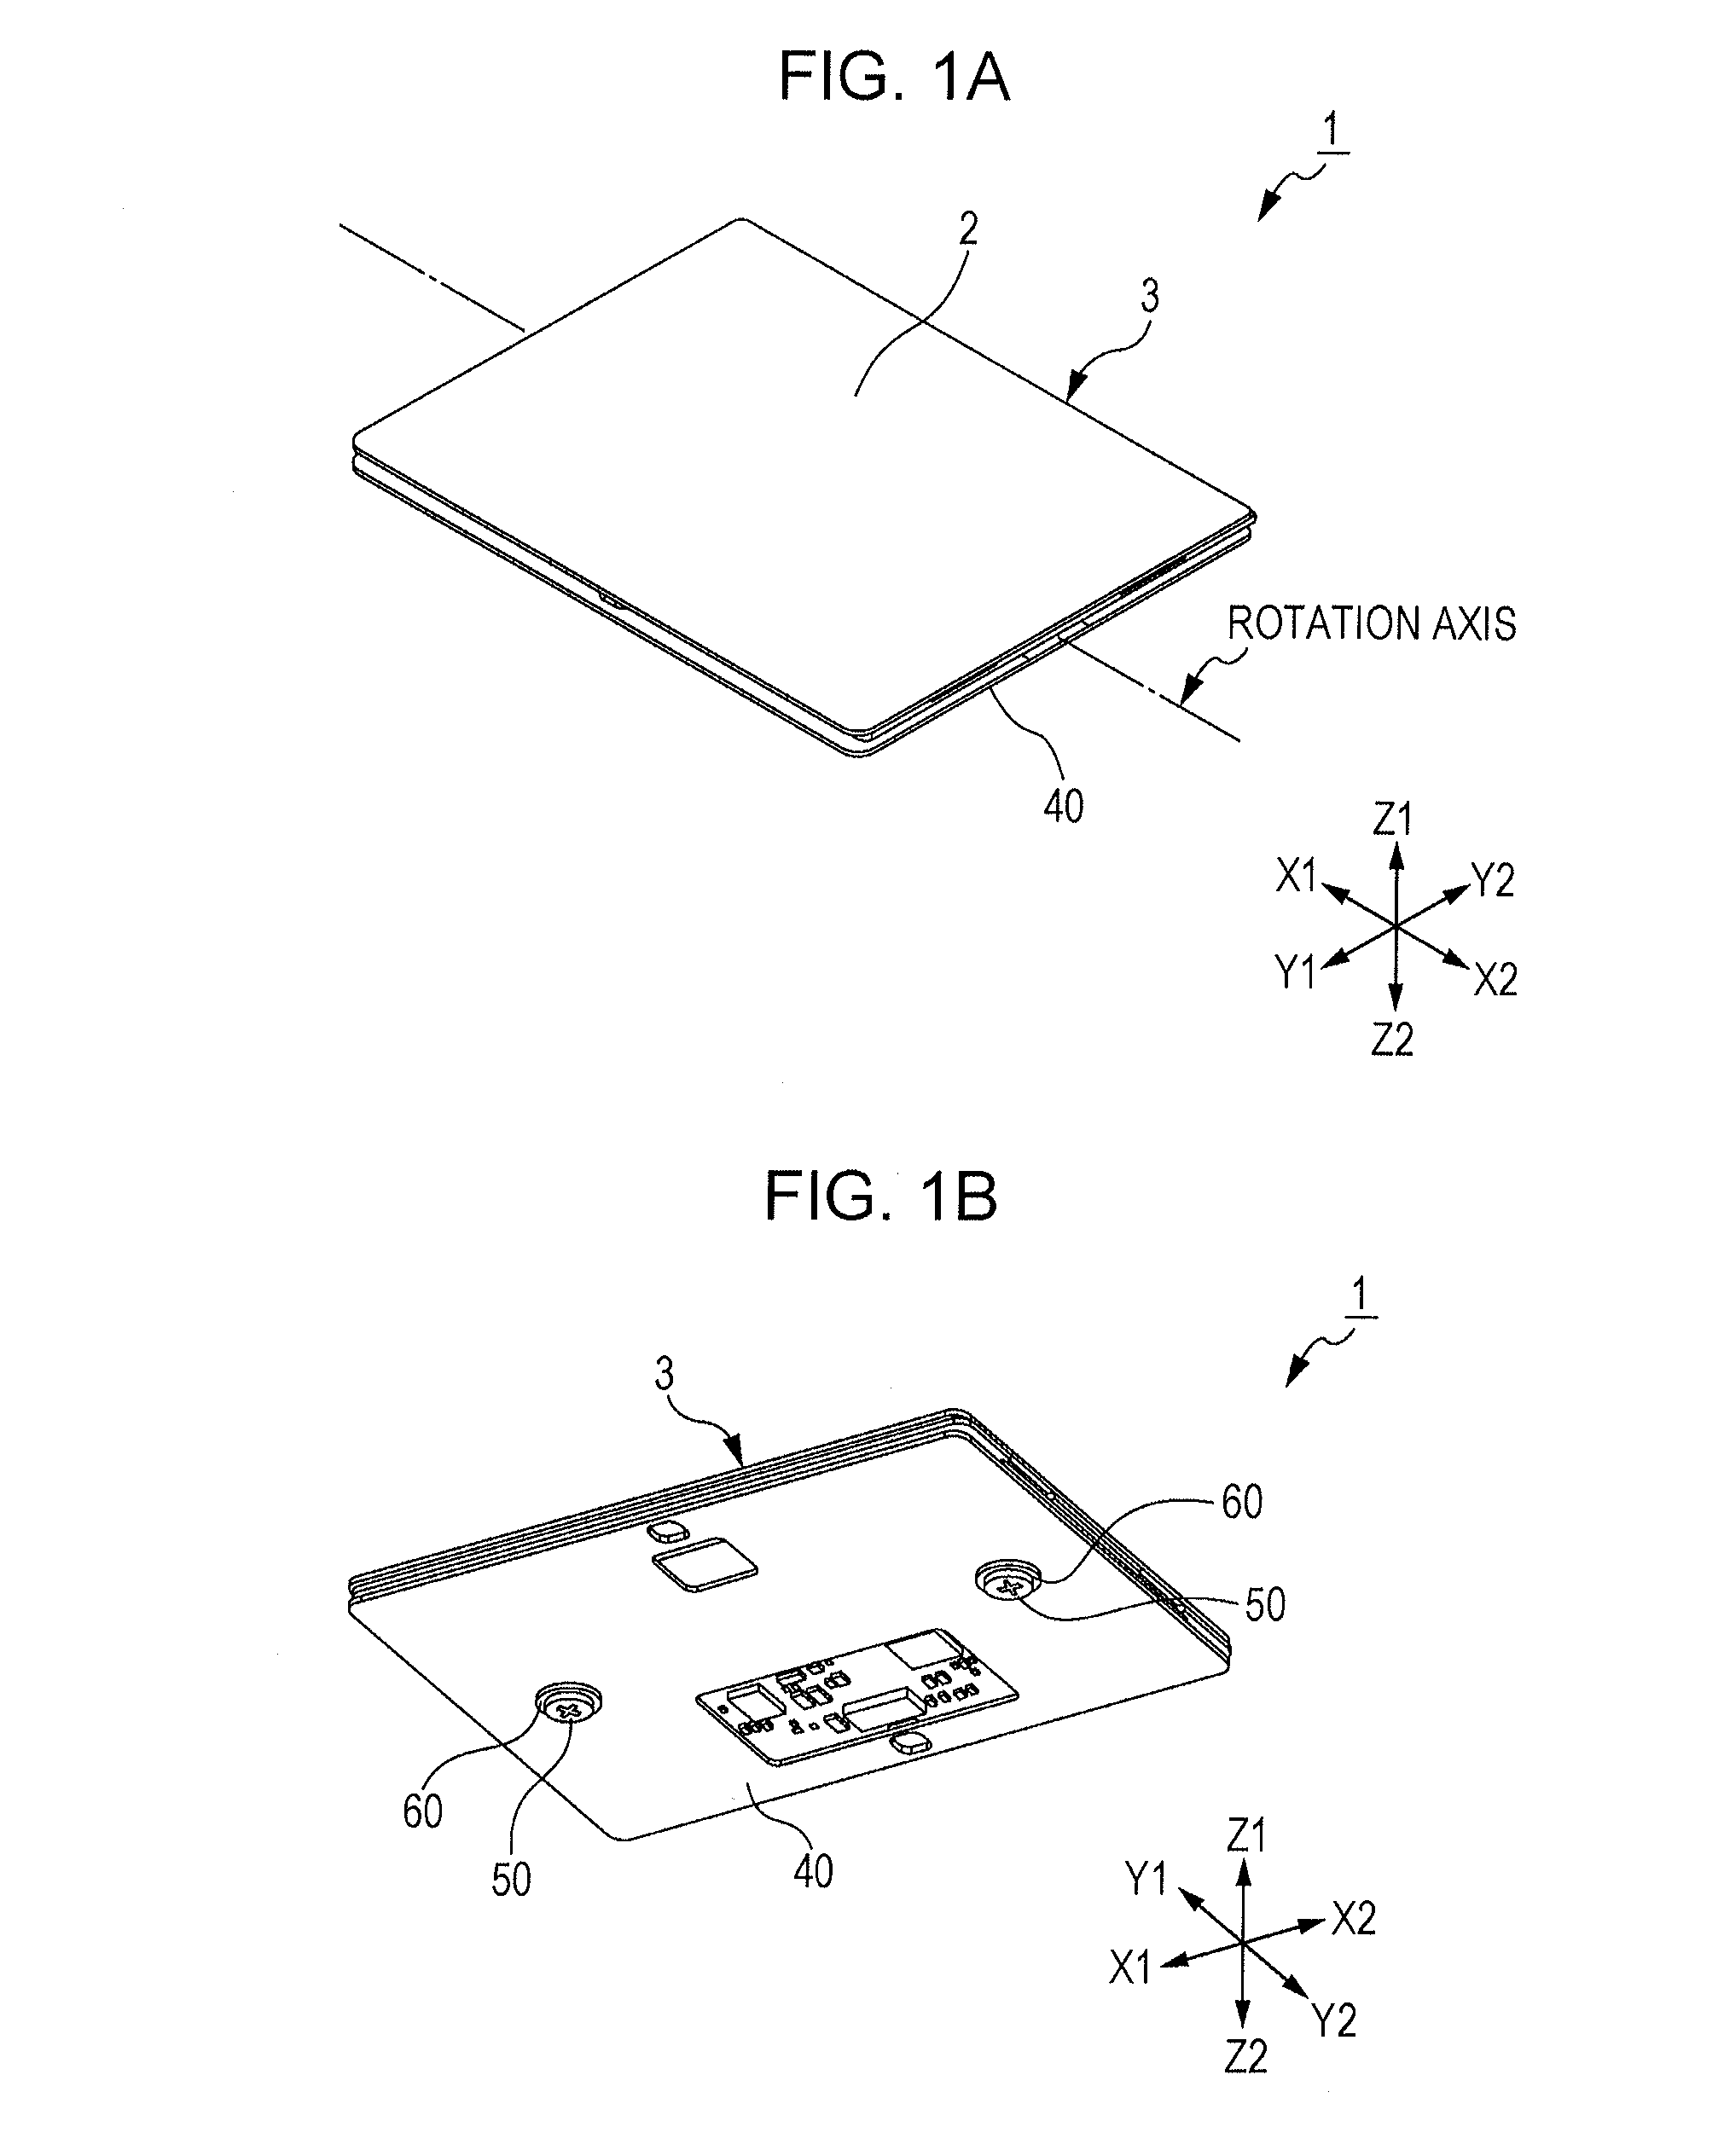 Touch pad input device